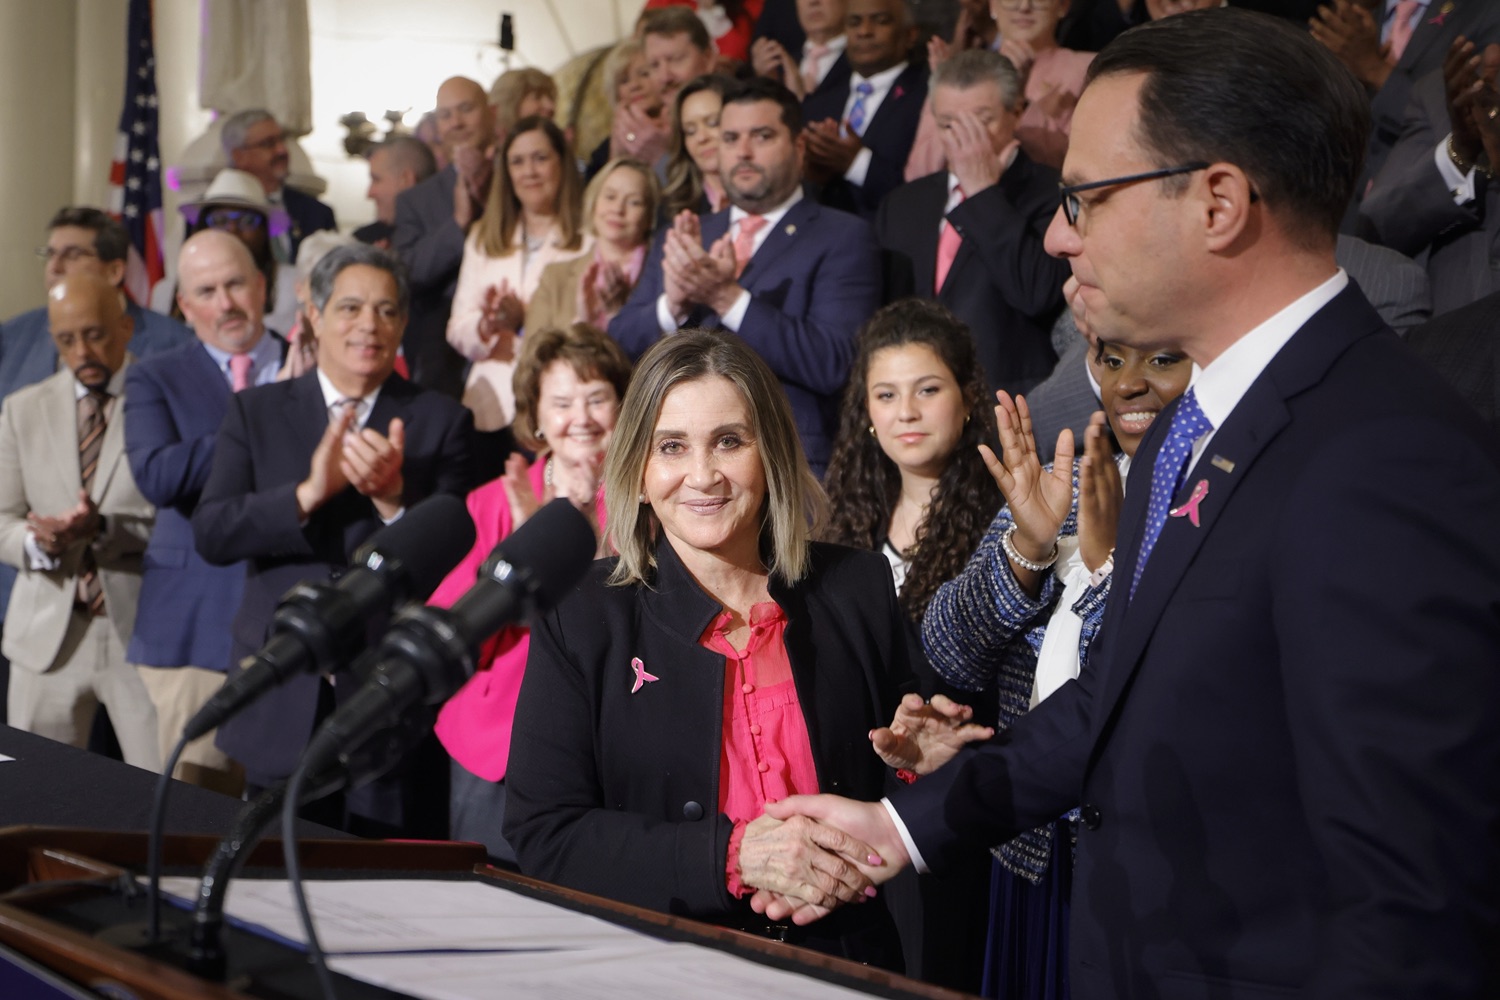 Governor Josh Shapiro signed the first bill of his Administration - Act 1 of 2023, a first-of-its-kind law in the nation that will require insurers to cover preventive breast and ovarian cancer screenings for high-risk women at no cost. MAY 01, 2023 - HARRISBURG, PA<br><a href="https://filesource.amperwave.net/commonwealthofpa/photo/23041_gov_sb8_dz_006.JPG" target="_blank">⇣ Download Photo</a>